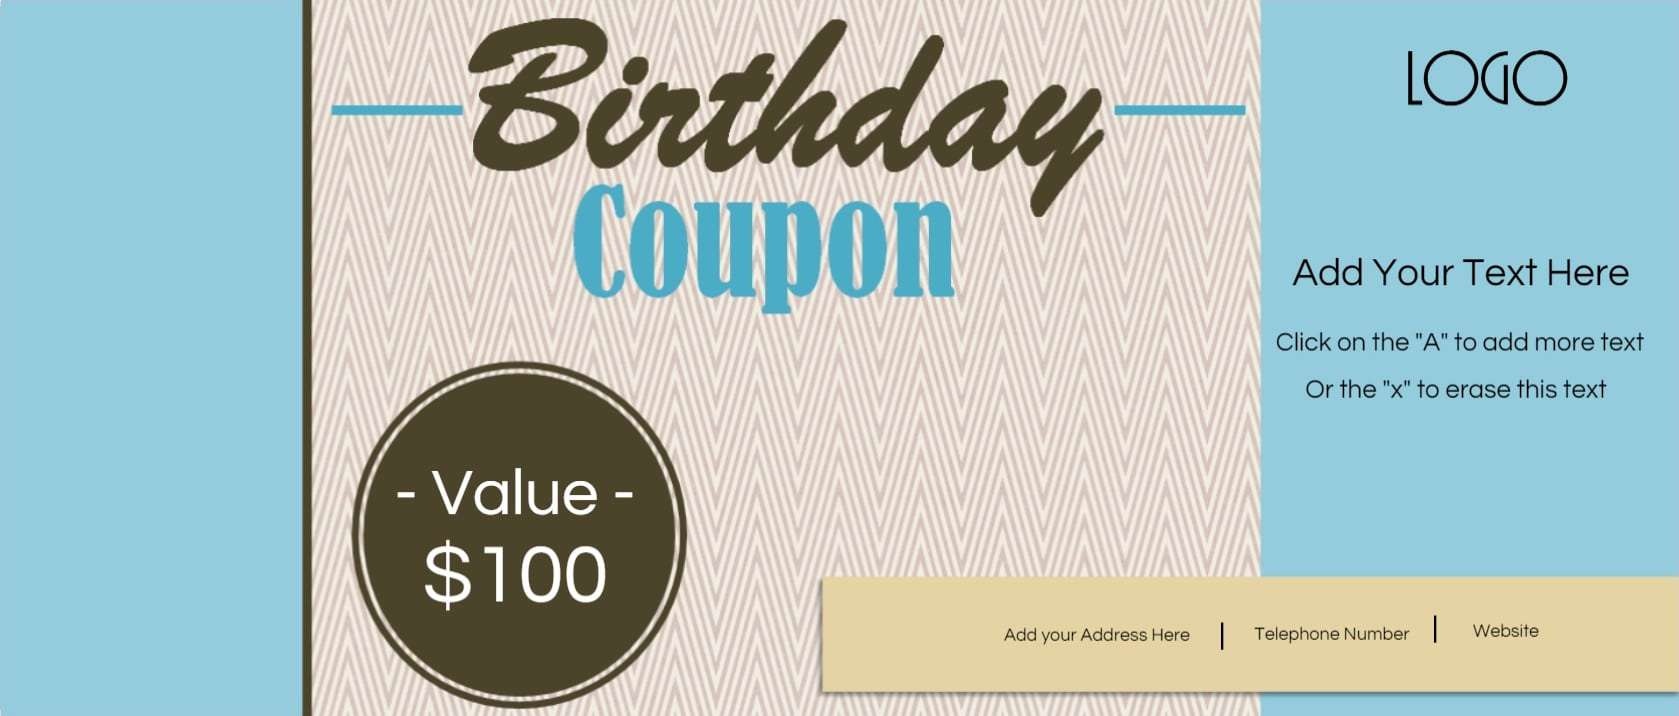 Free Custom Birthday Coupons - Customize Online &amp;amp; Print At Home - Free Printable Blank Birthday Coupons